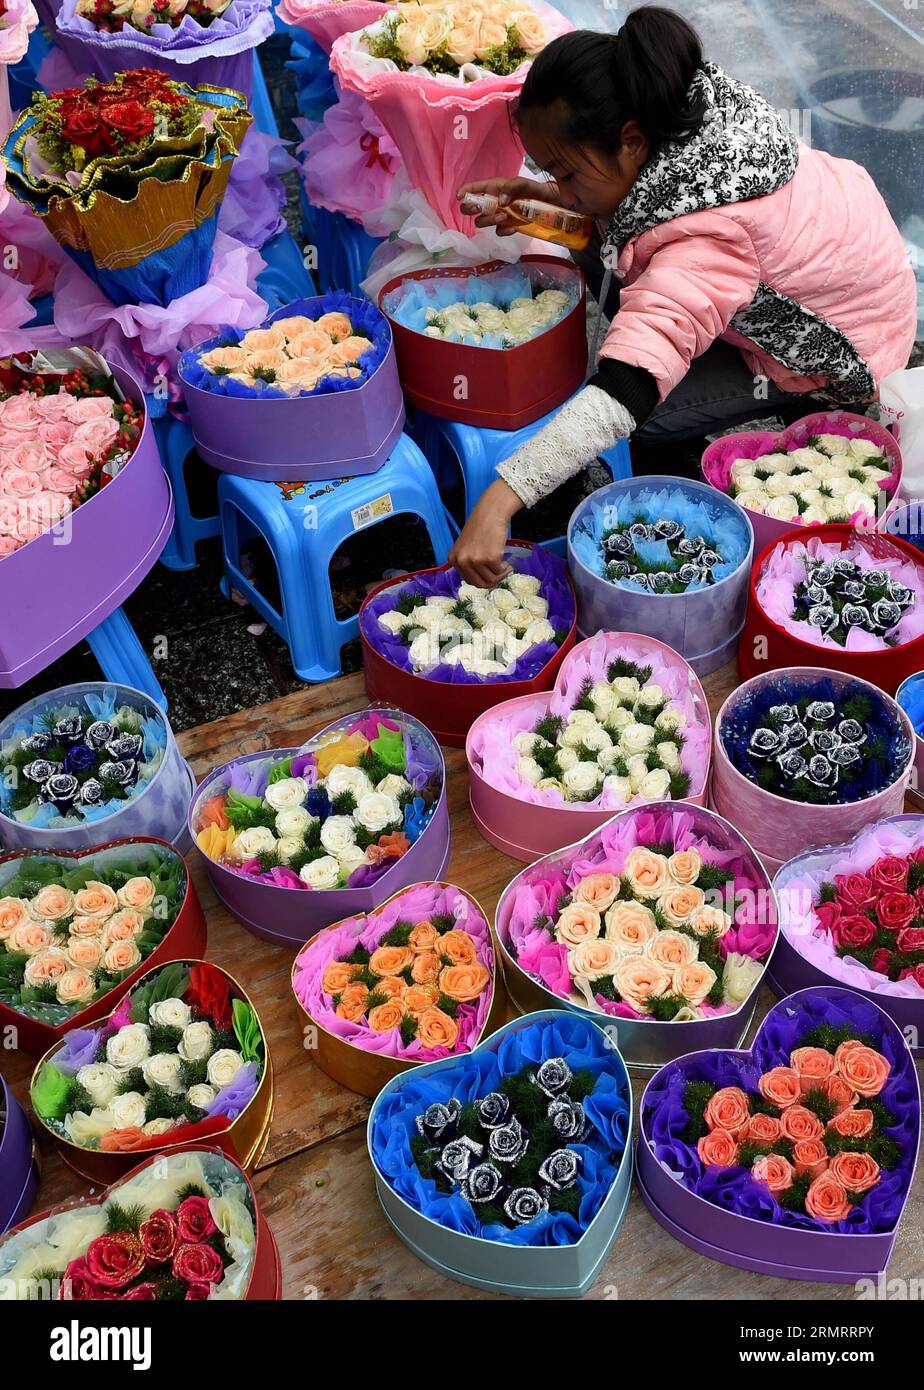 A vender arranges flowers ahead of the Qixi Festival in Dali city, southwest China s Yunnan Province, Aug. 1, 2014. The Qixi Festival, also known as Chinese Valentine s day, which falls on Aug. 2 this year, originates from a folk tale about a fairy falling in love with a mortal. The marriage allegedly enraged the Goddess of Heaven, who created the Milky Way to separate them. Supposedly, the pair of lovers are reunited for a single night each year by magpies that fly into the heavens and form a bridge for them to cross. ) (yxb) CHINA-QIXI-CHINESE VALENTINE S DAY-ACTIVITY (CN) LinxYiguang PUBLIC Stock Photo